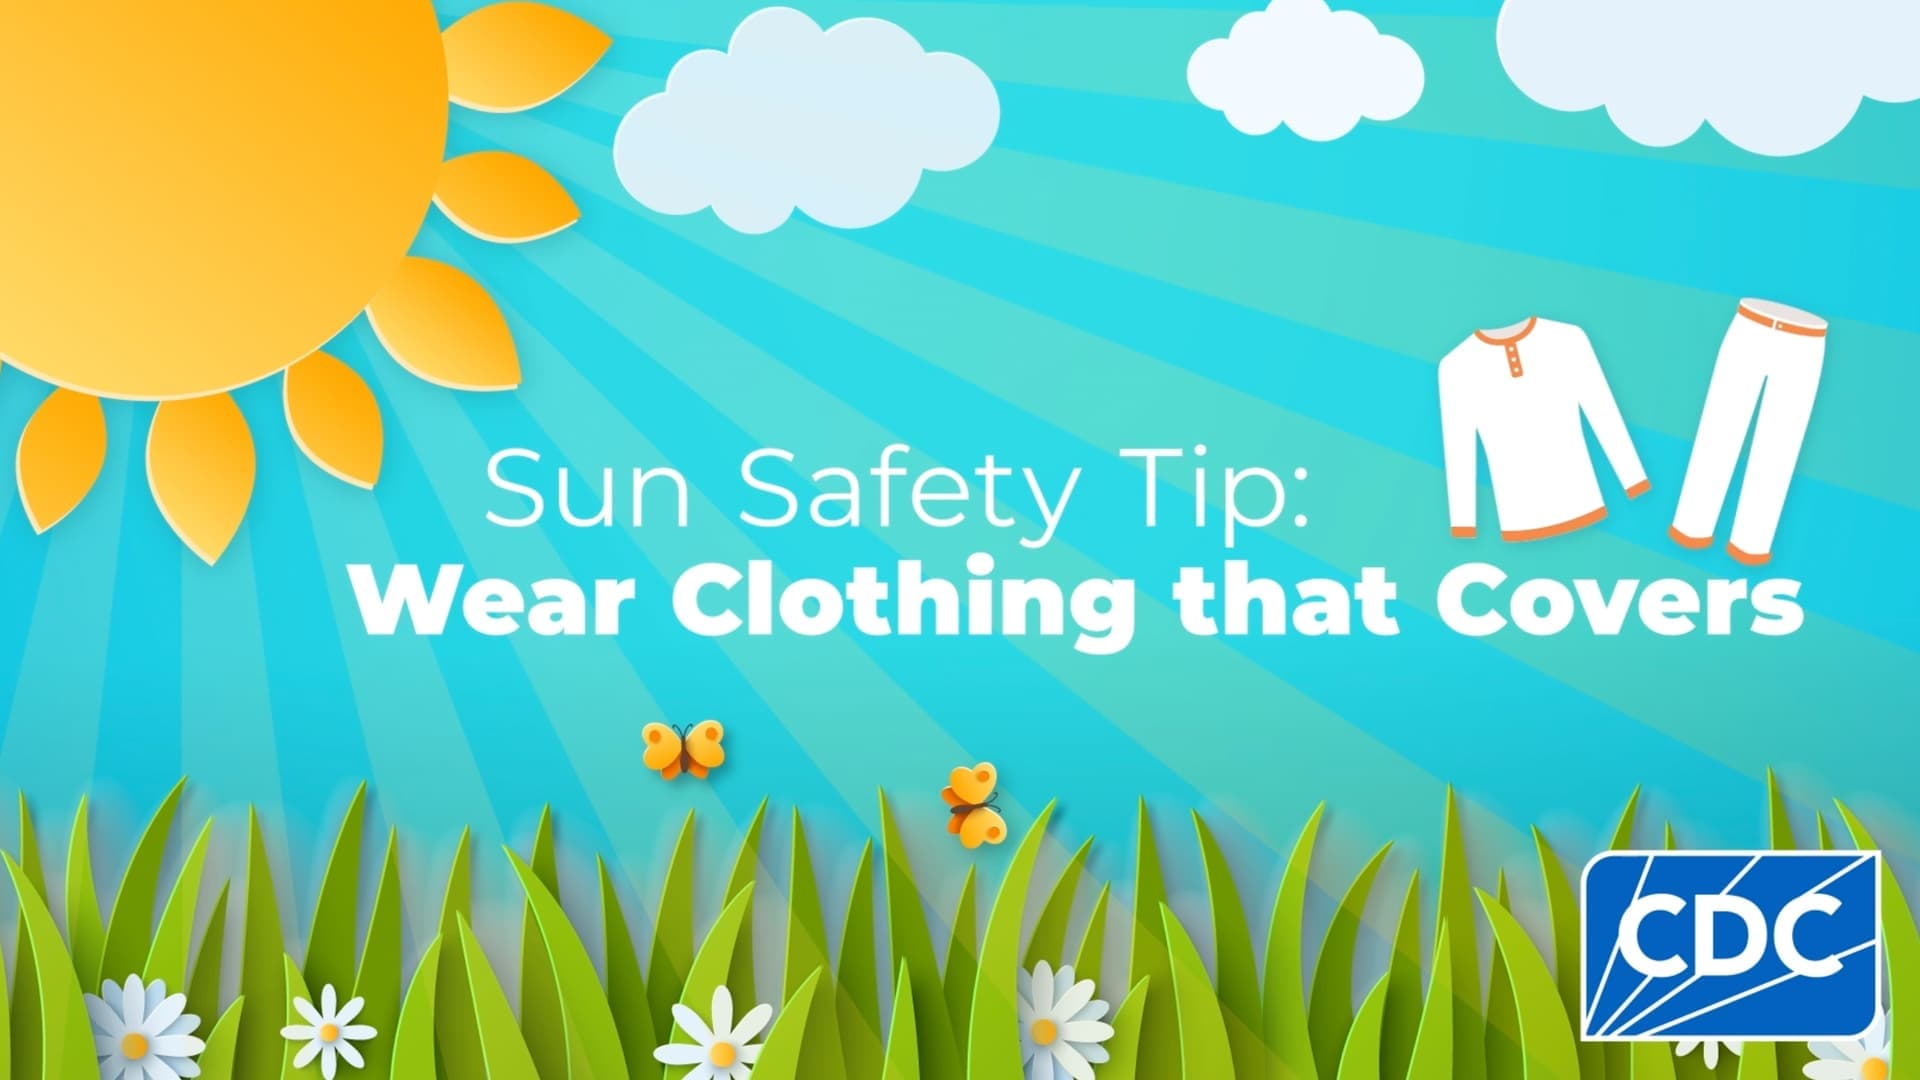 Sun Safety Tip: Wear Clothing that Covers